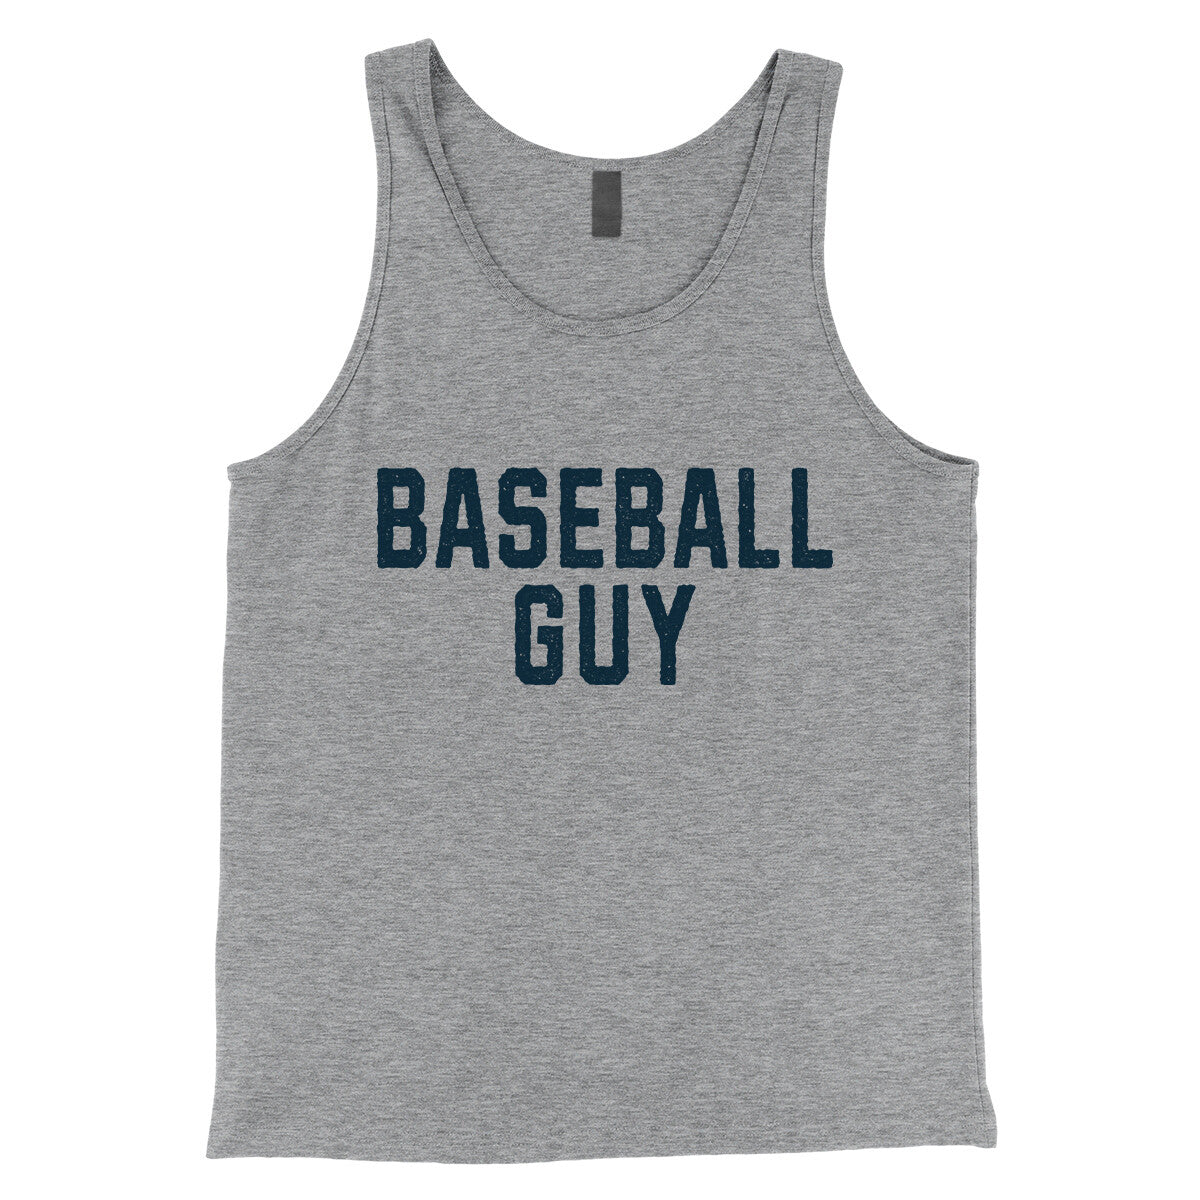 Baseball Guy in Athletic Heather Color